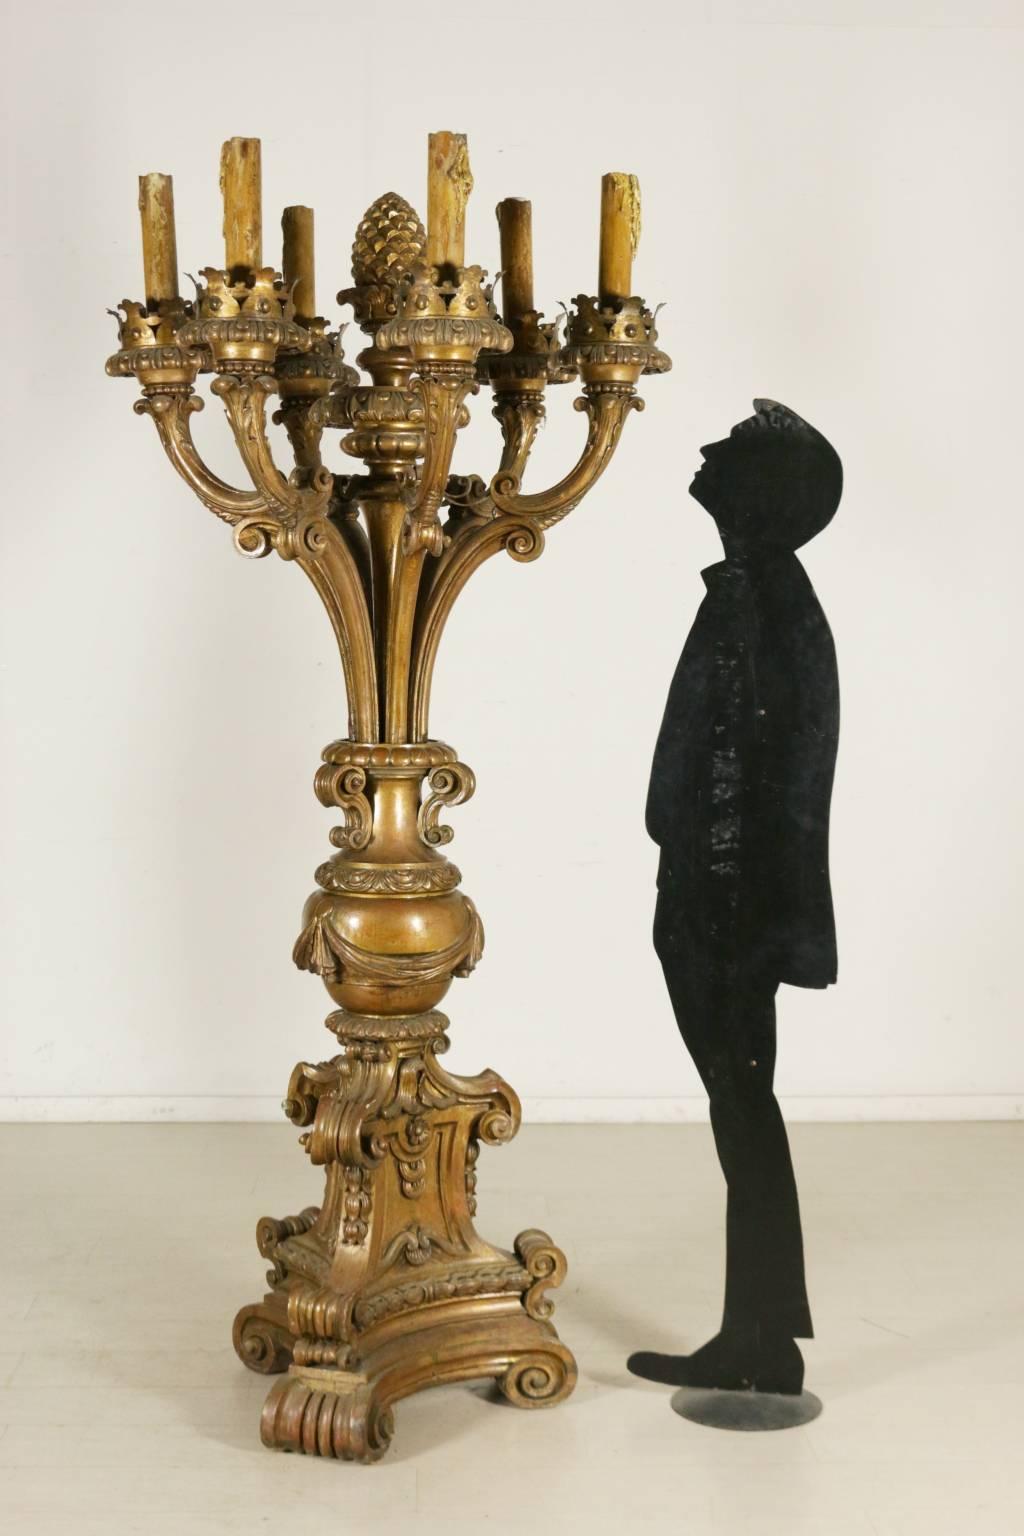 A large carved and gilded wooden torch holder, assembled with antique materials. Tripartite stand with neoclassical carvings and spirals. The central body ends in a carved pineapple and six arms with opposing C-shape, holding the lamps. Manufactured